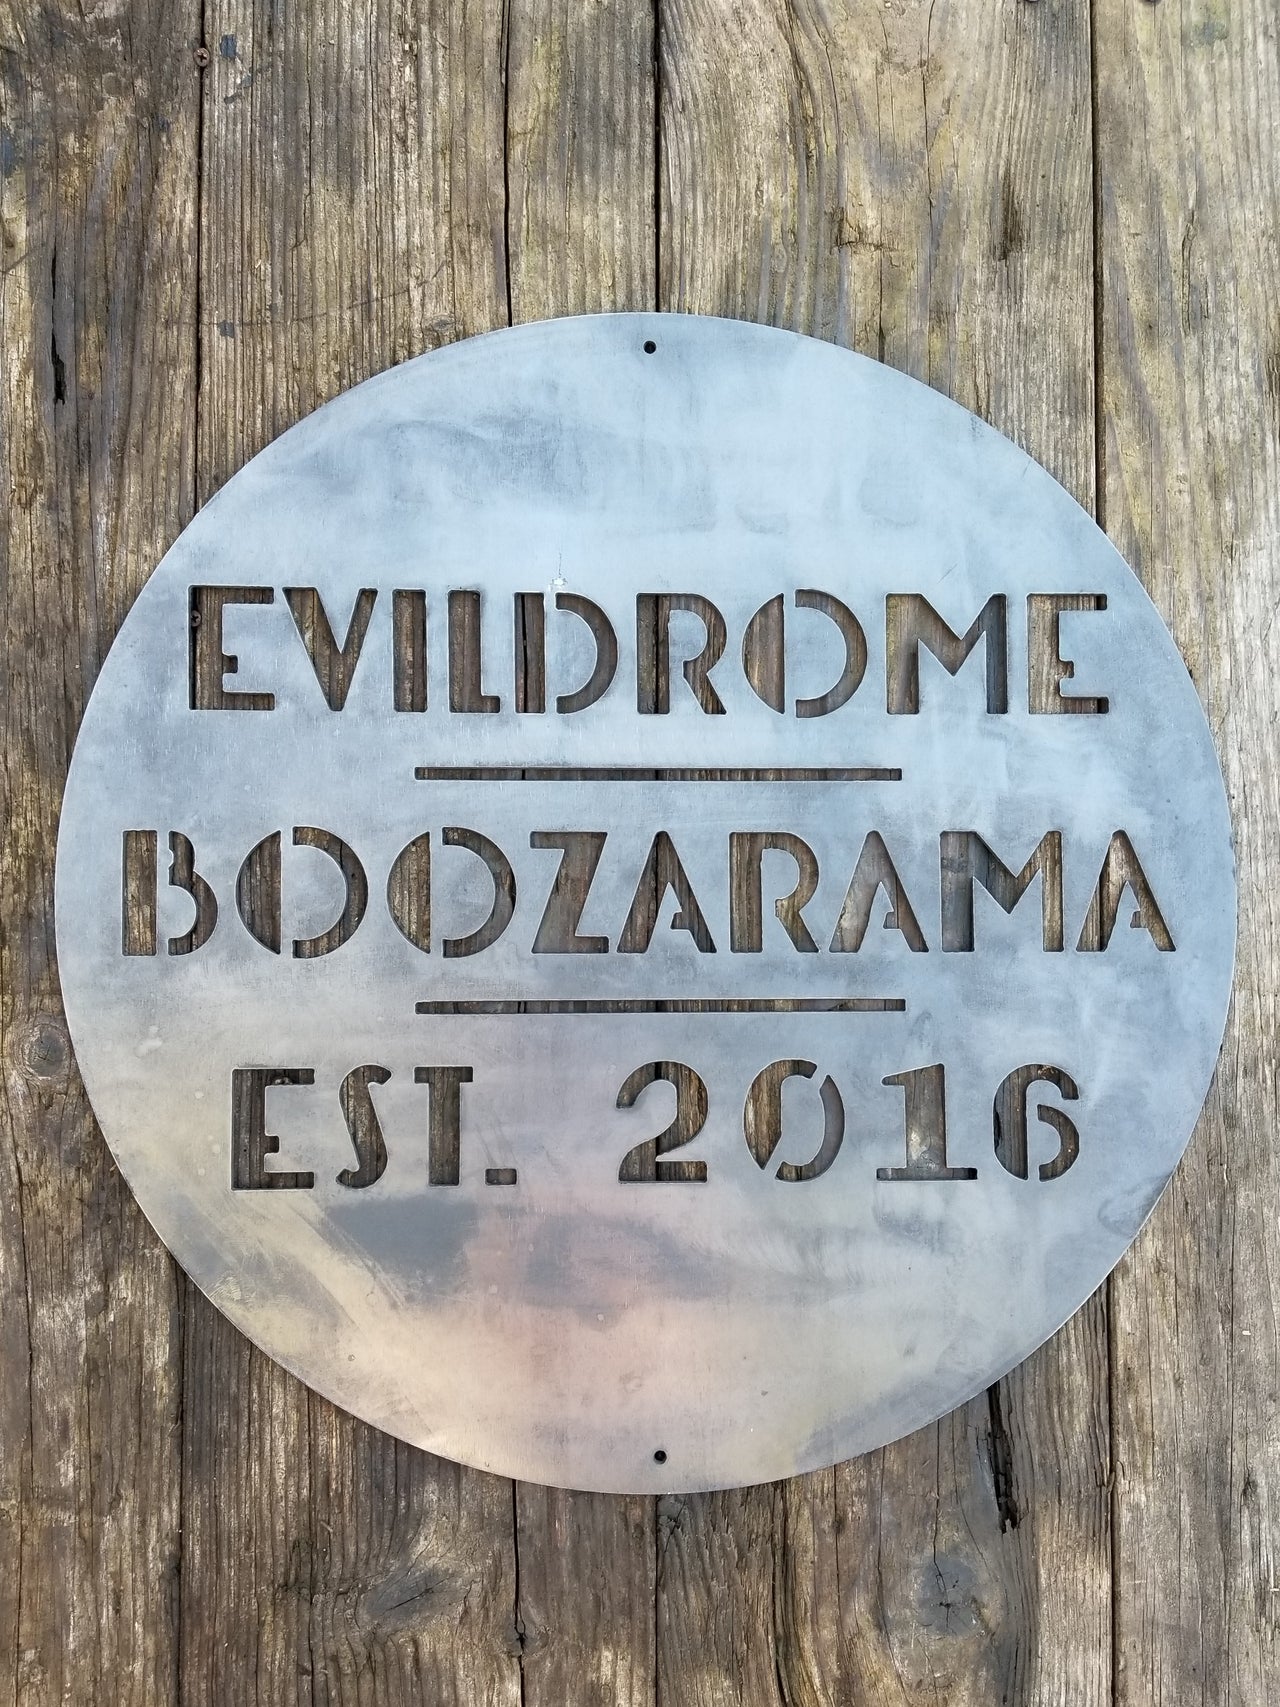 This is a round art deco sign that has three lines of text with a straight line seperating them. The sign reads, "Evildrome Boozarama Est. 2016"